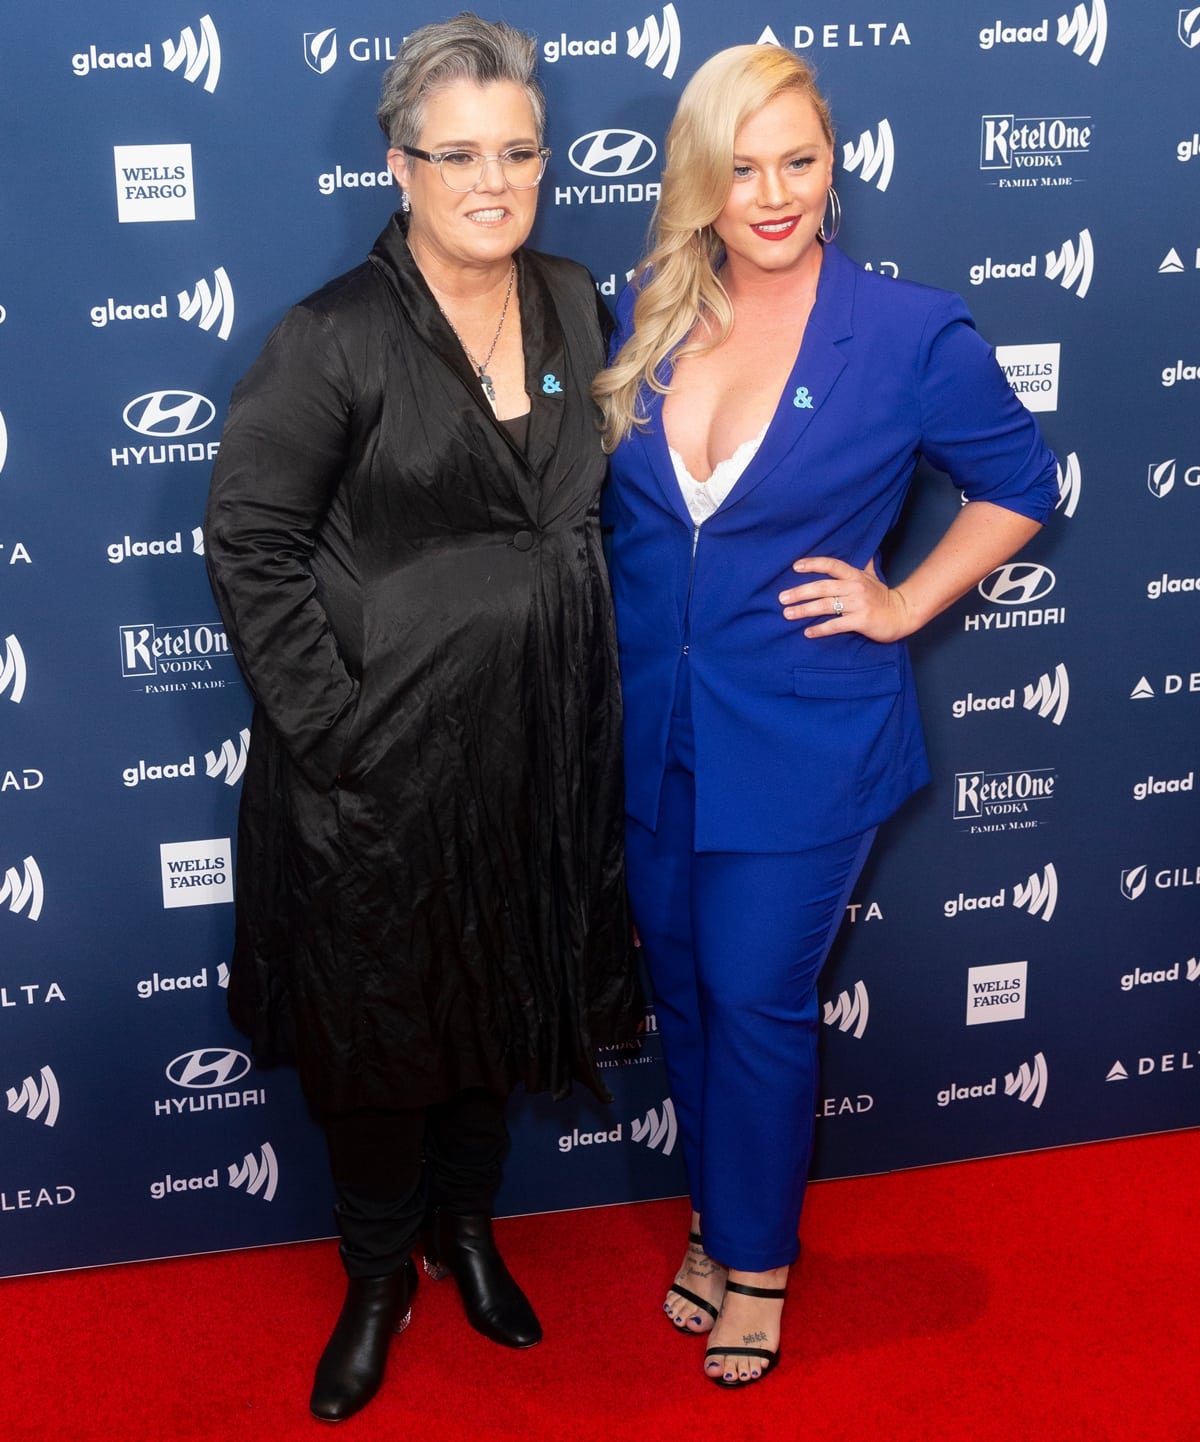 Rosie O'Donnell with her then-fiancée Elizabeth Rooney